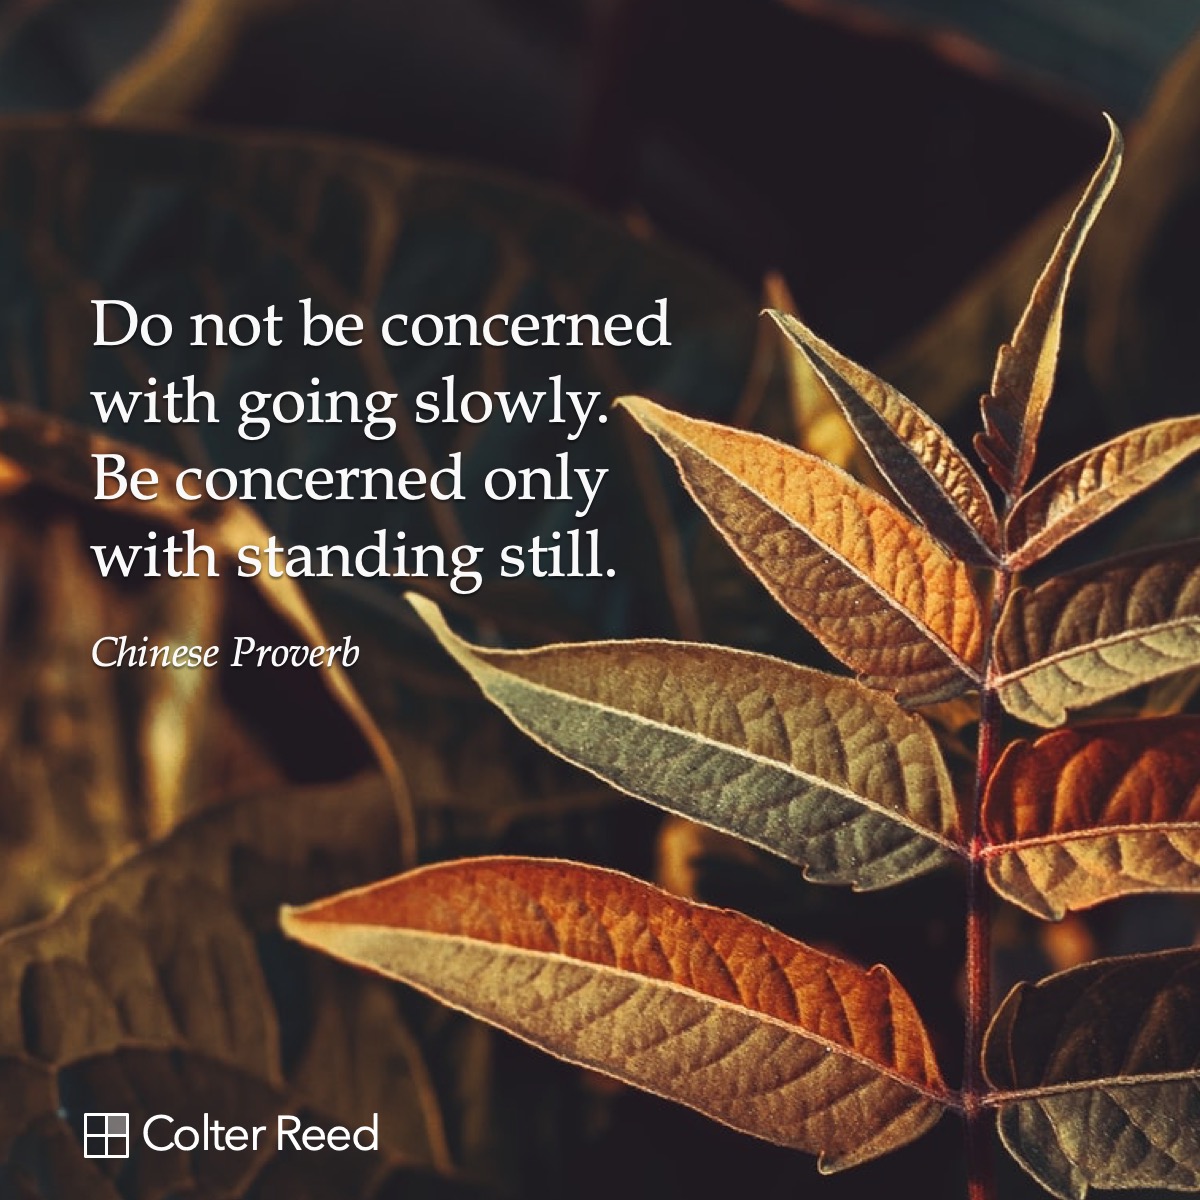 Do not be concerned with going slowly. Be concerned only with standing still. —Chinese Proverb